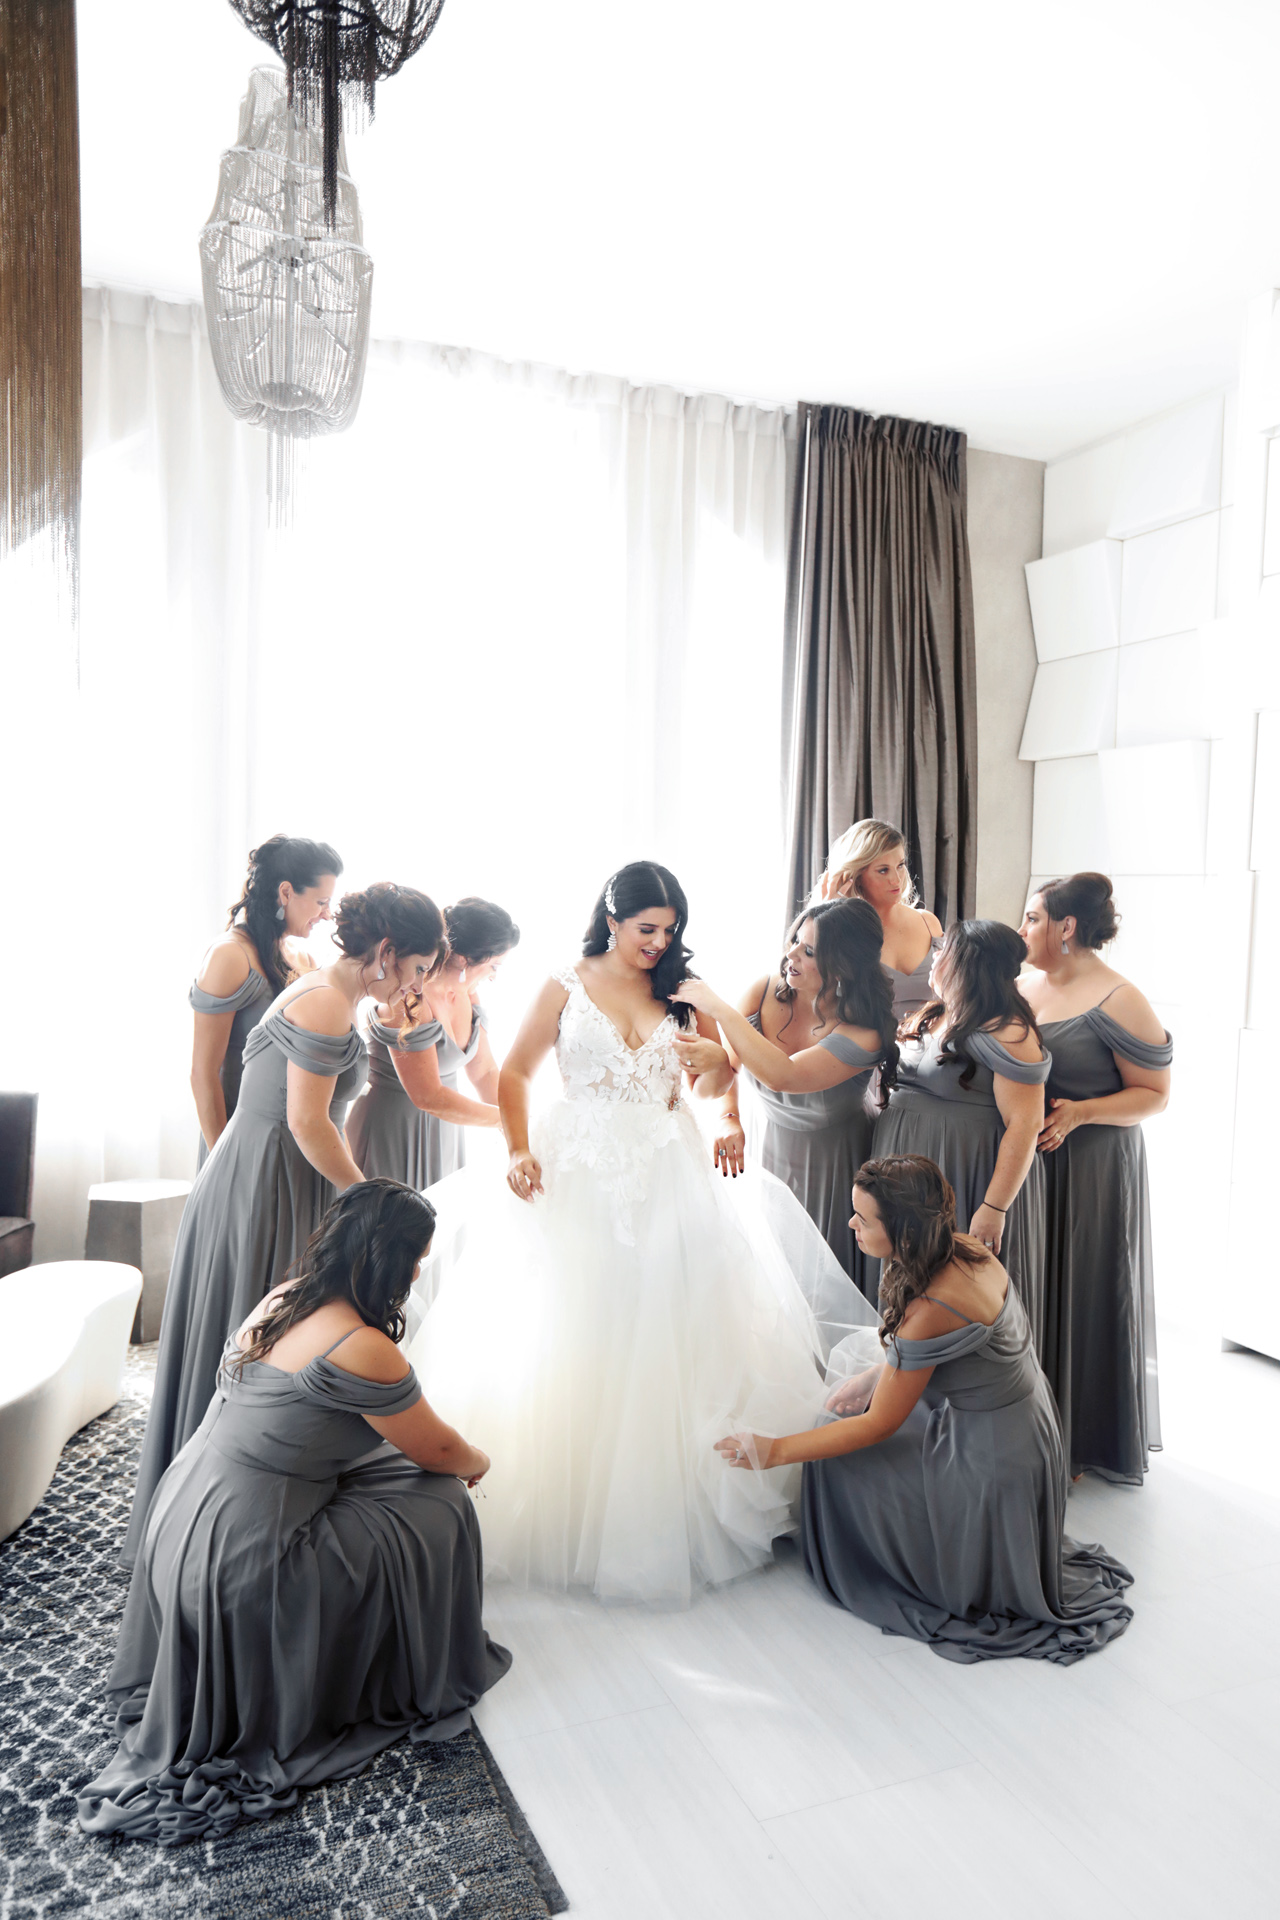 bridesmaids assist the bride before the wedding ceremony